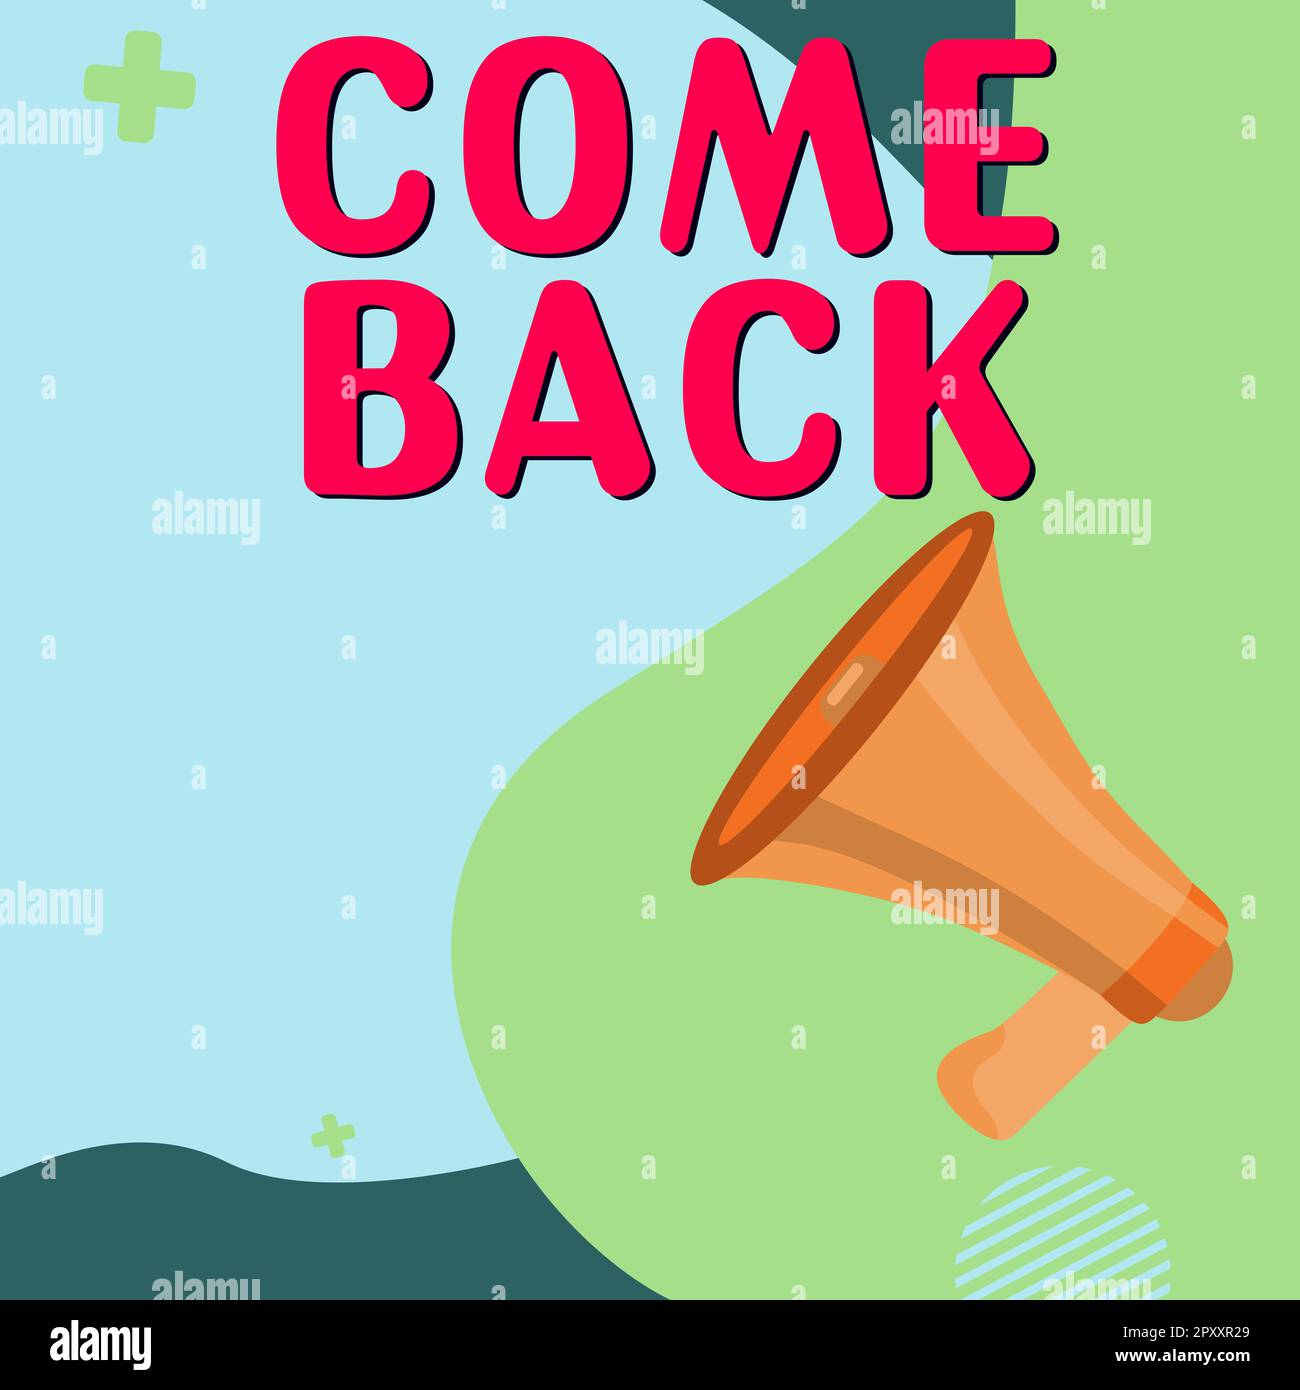 to come back clipart